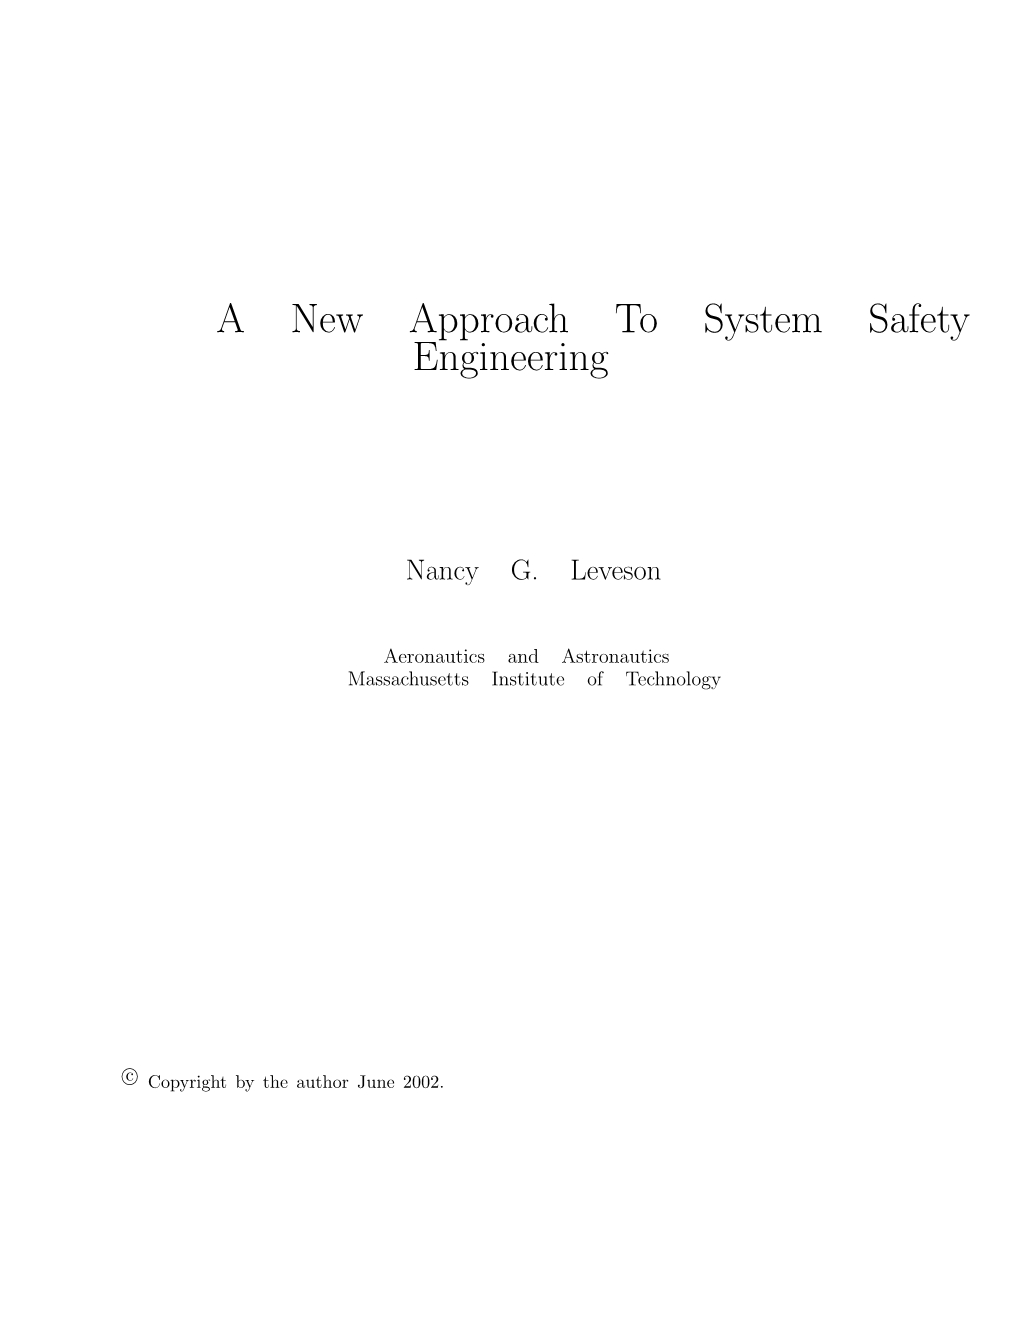 A New Approach to System Safety Engineering